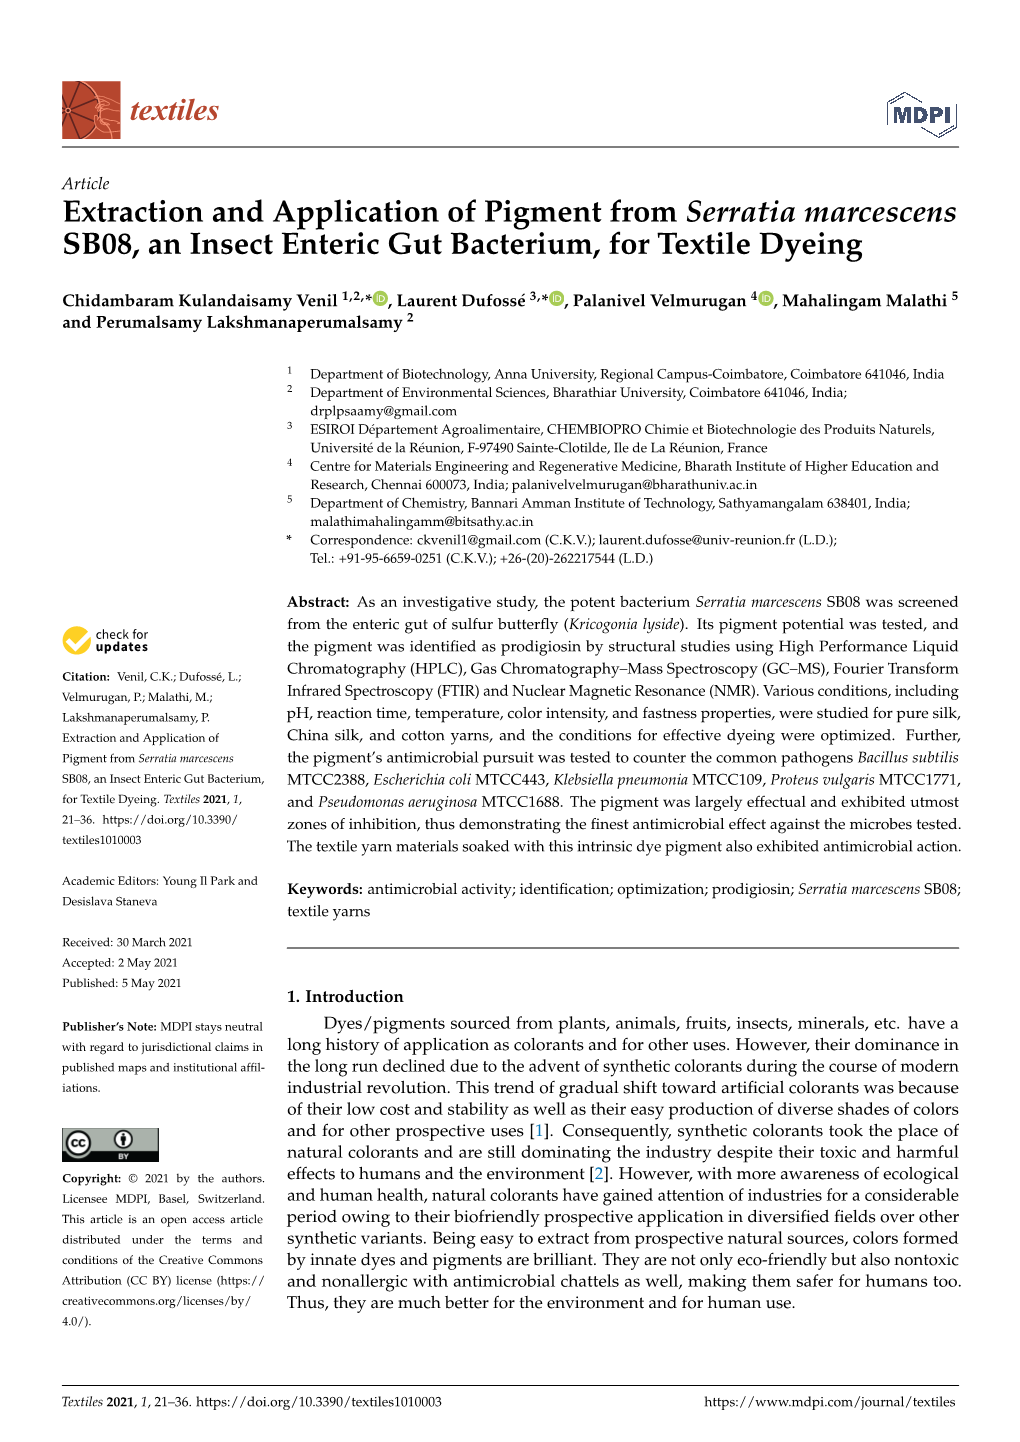 Extraction and Application of Pigment from Serratia Marcescens SB08, an Insect Enteric Gut Bacterium, for Textile Dyeing